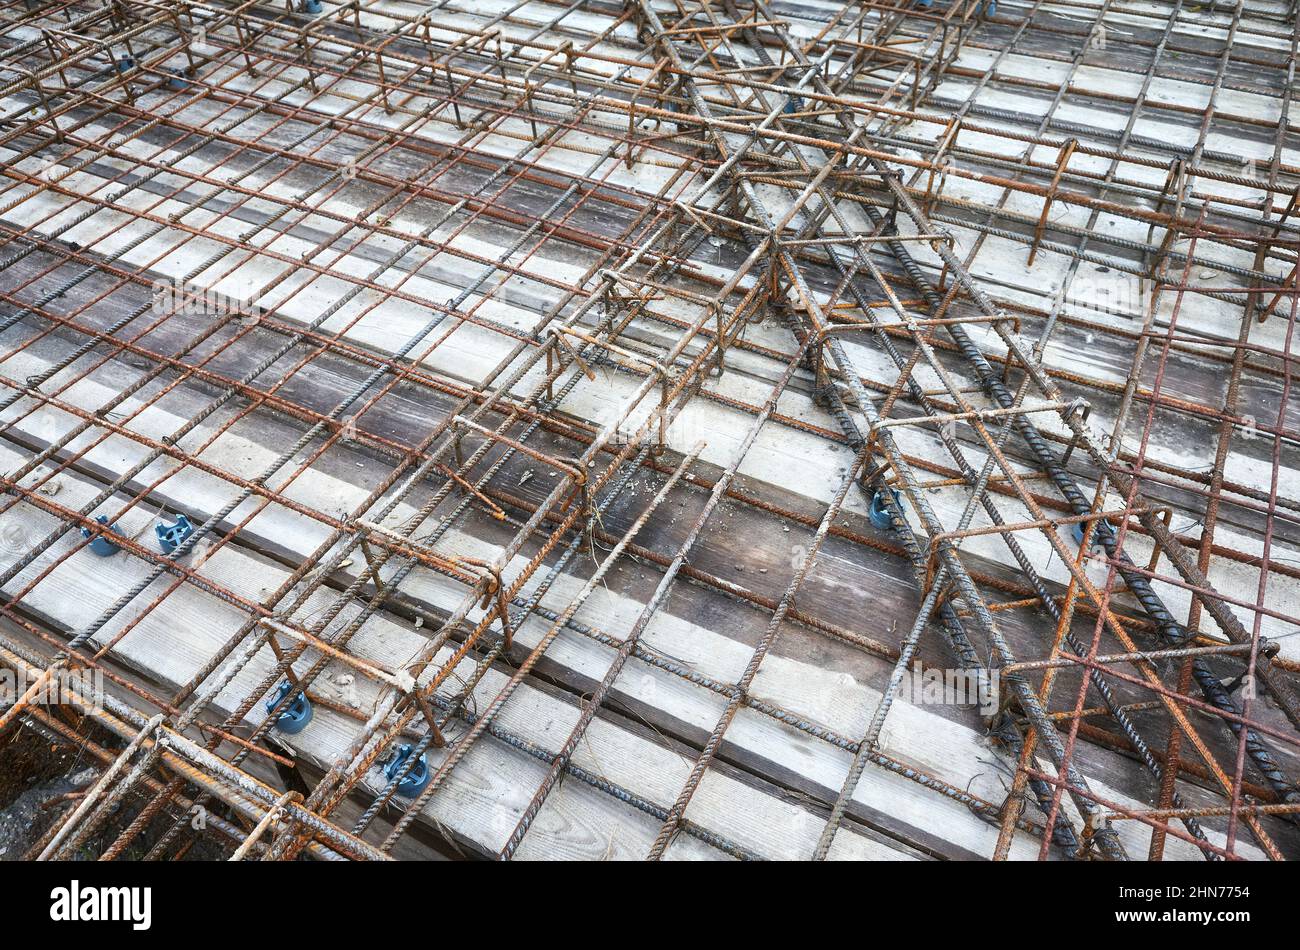 Picture of ribbed steel bar reinforcement construction ready for concrete casting. Stock Photo